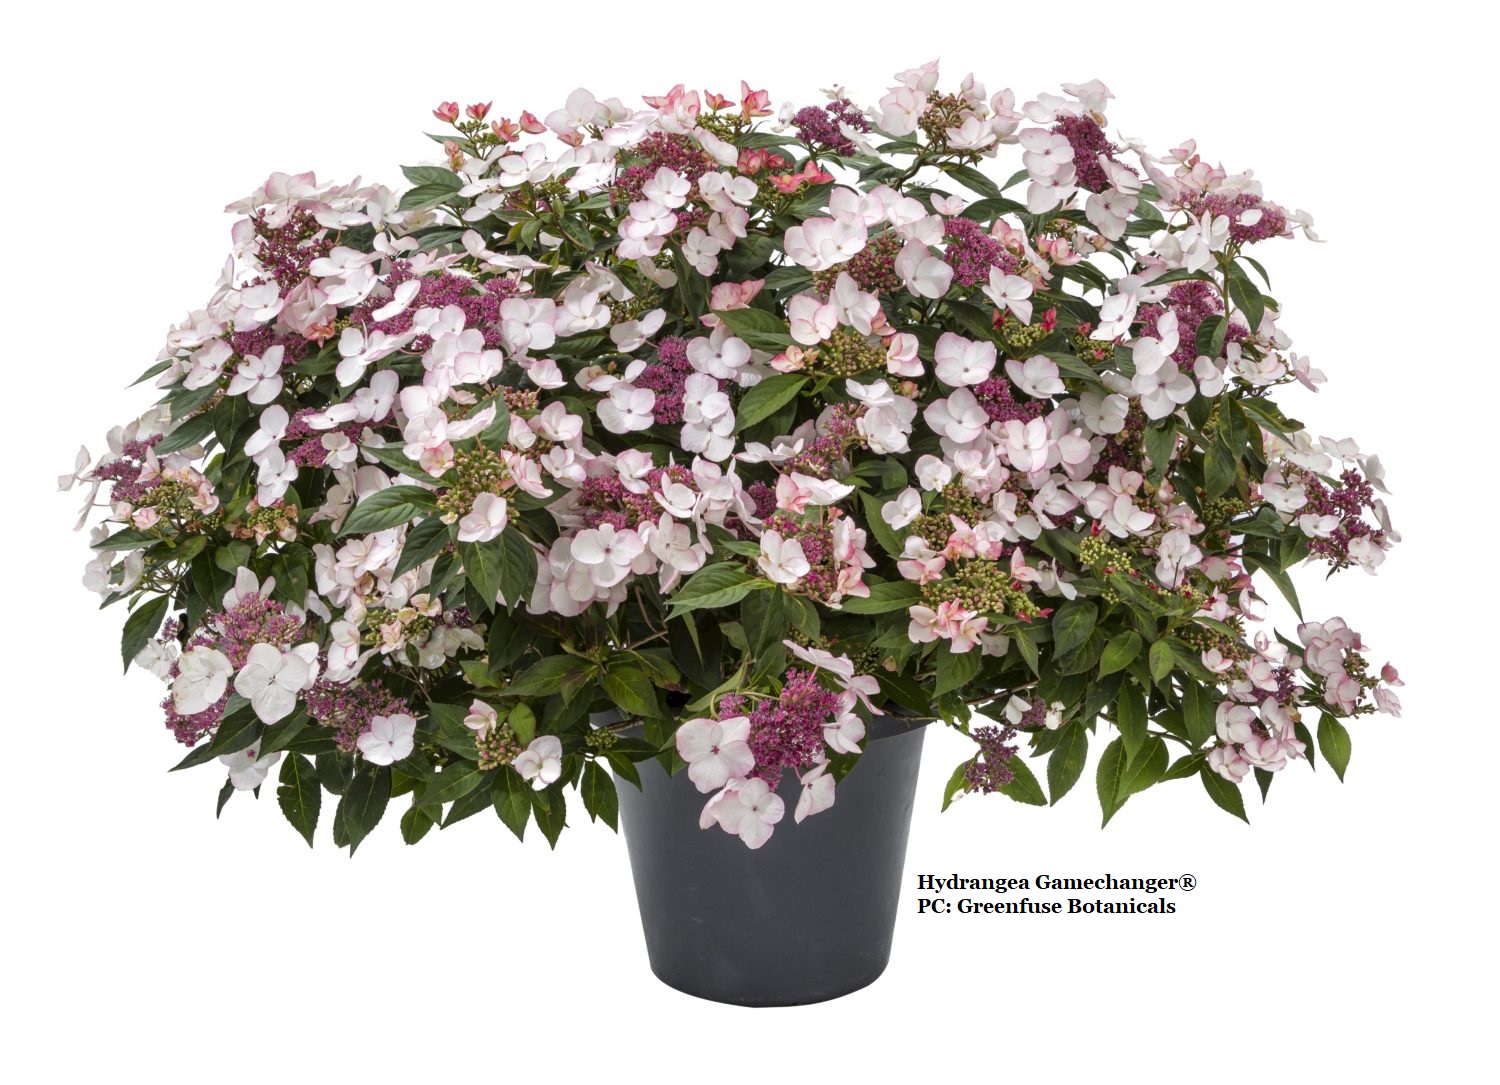 Hydrangea spp. Gamechanger® doesn't need a chilling period to set flowers